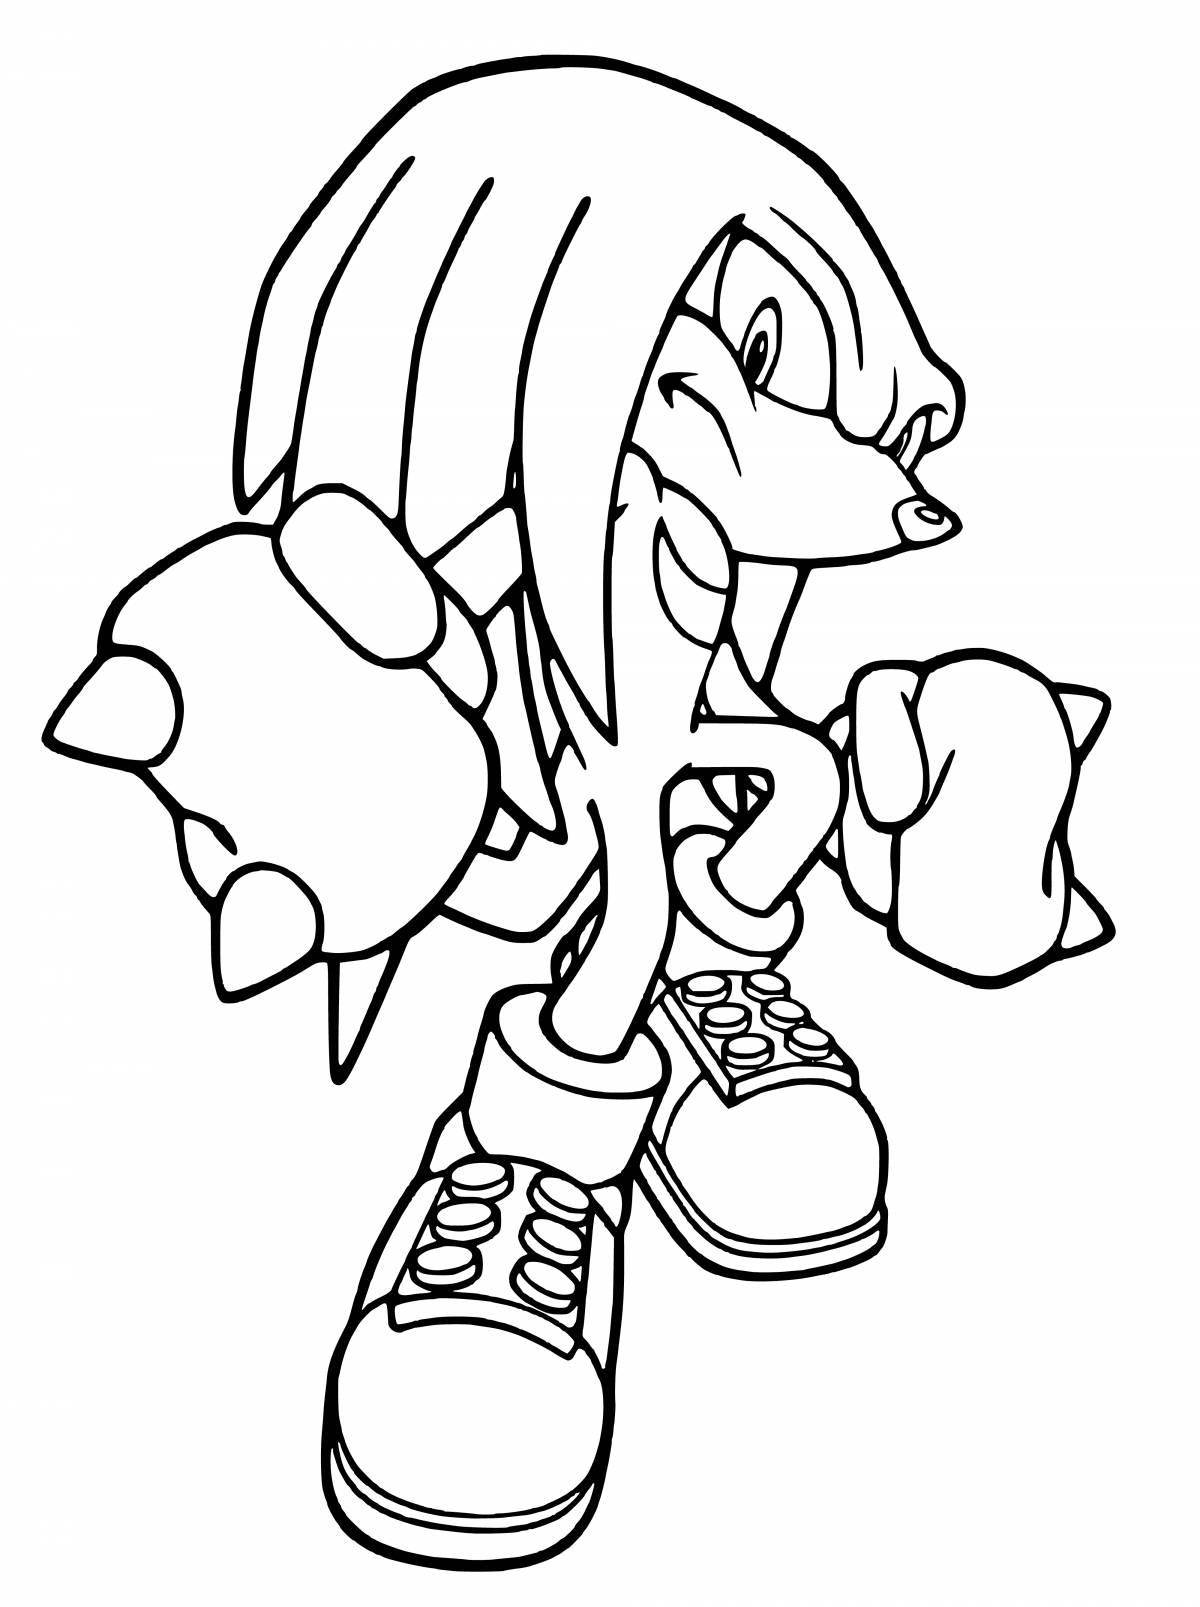 Charming knuckles and rouge coloring book